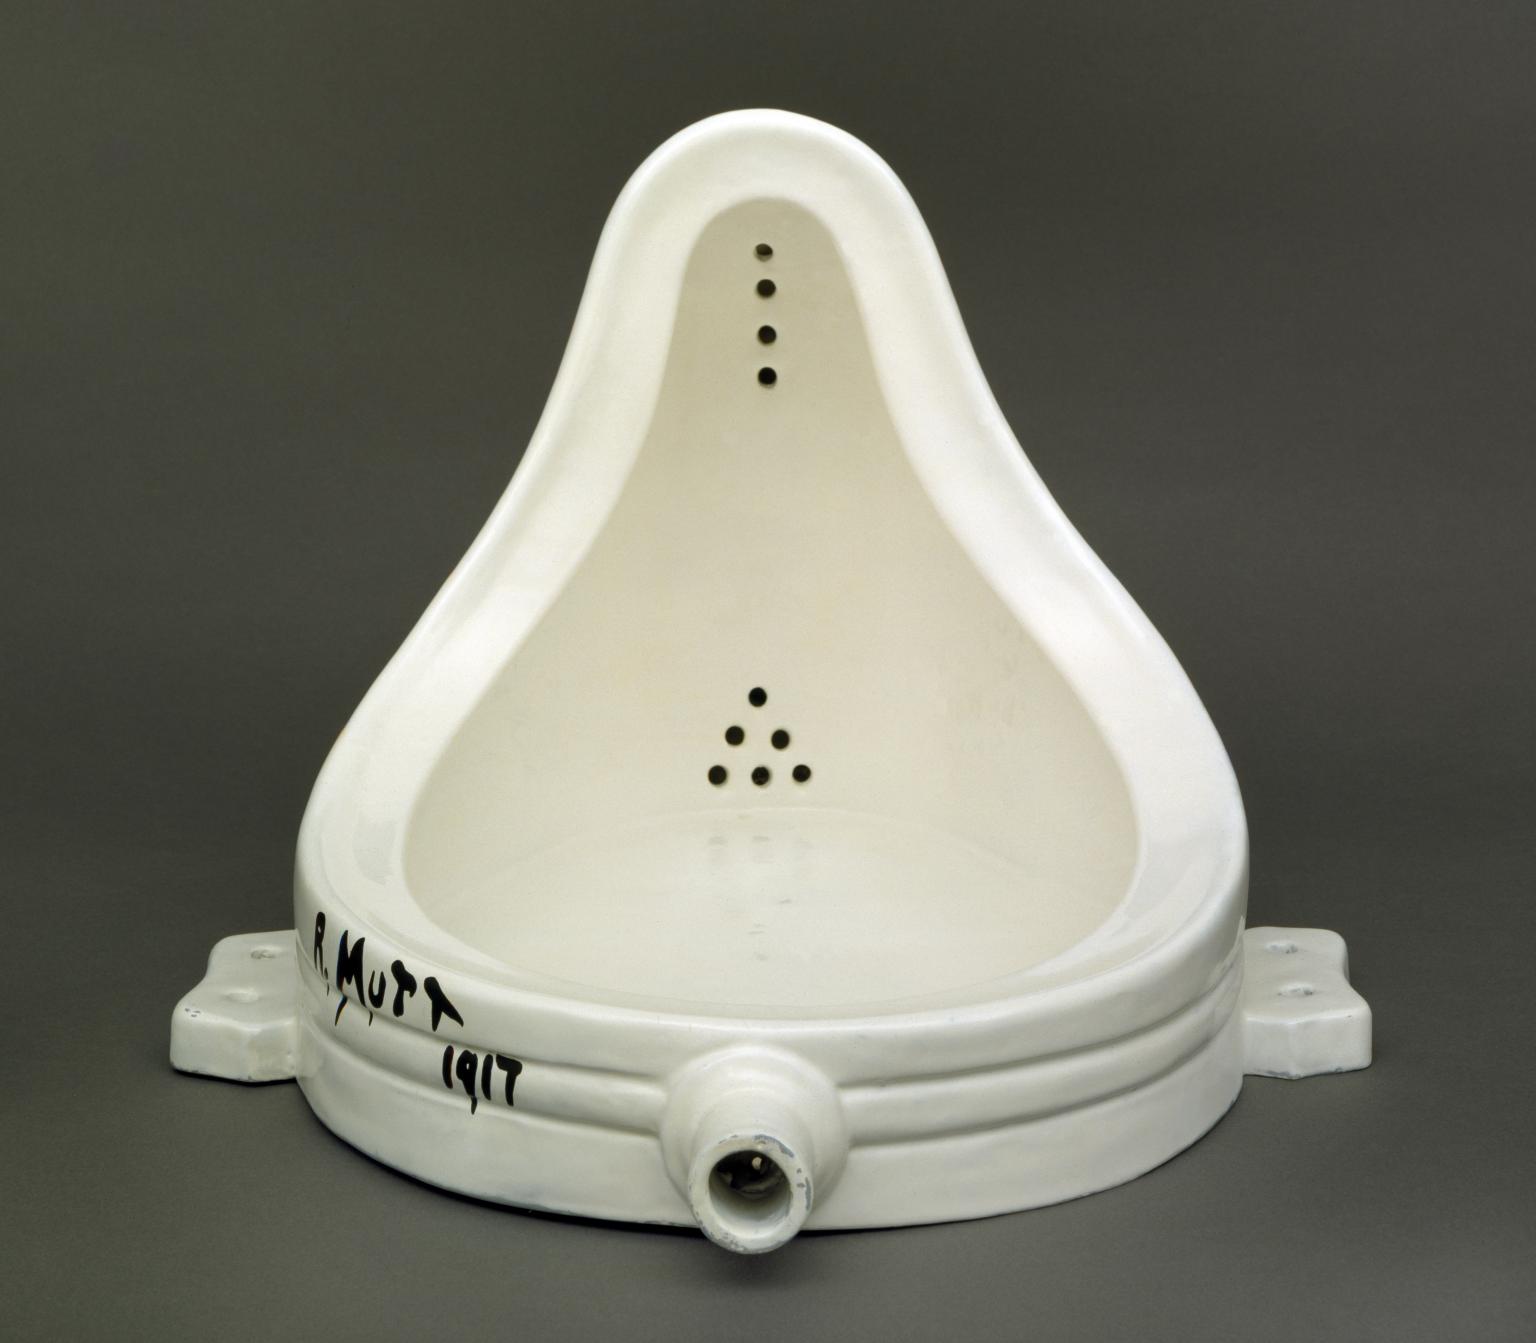 Marcel Duchamp's Fountain, an upside down urinal with writing scrawled on the lower left side